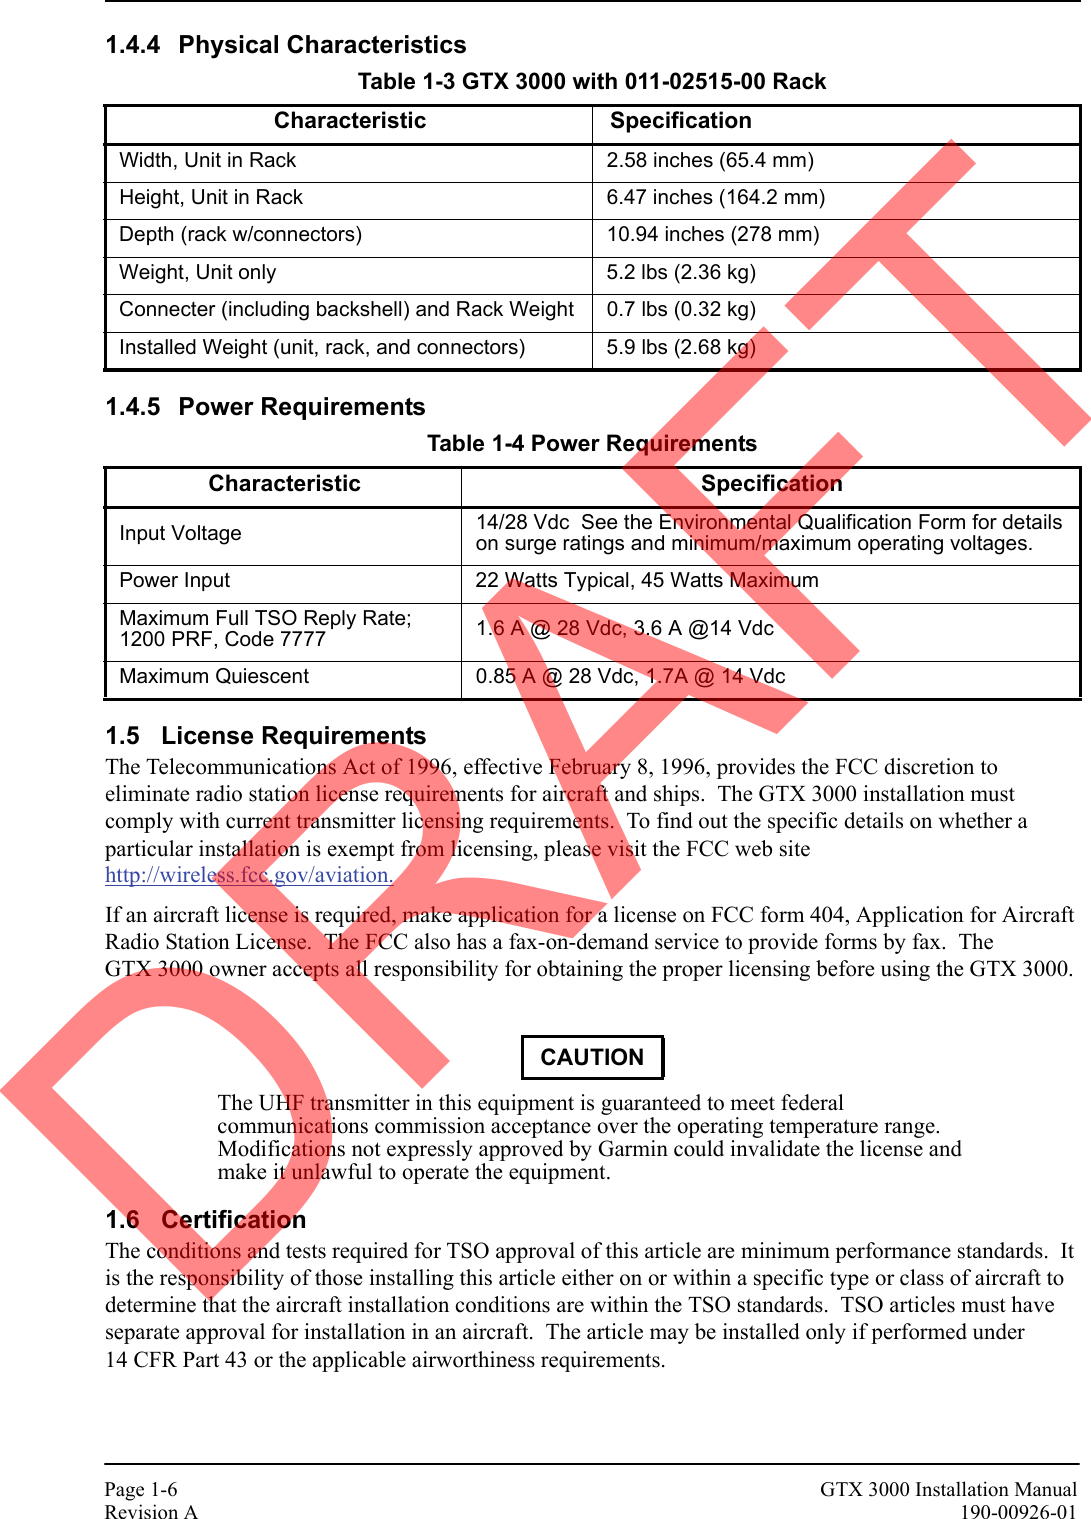 Page 1-6 GTX 3000 Installation ManualRevision A 190-00926-011.4.4 Physical Characteristics1.4.5 Power Requirements1.5 License RequirementsThe Telecommunications Act of 1996, effective February 8, 1996, provides the FCC discretion to eliminate radio station license requirements for aircraft and ships.  The GTX 3000 installation must comply with current transmitter licensing requirements.  To find out the specific details on whether a particular installation is exempt from licensing, please visit the FCC web site http://wireless.fcc.gov/aviation.If an aircraft license is required, make application for a license on FCC form 404, Application for Aircraft Radio Station License.  The FCC also has a fax-on-demand service to provide forms by fax.  The GTX 3000 owner accepts all responsibility for obtaining the proper licensing before using the GTX 3000.The UHF transmitter in this equipment is guaranteed to meet federal communications commission acceptance over the operating temperature range.  Modifications not expressly approved by Garmin could invalidate the license and make it unlawful to operate the equipment.1.6 CertificationThe conditions and tests required for TSO approval of this article are minimum performance standards.  It is the responsibility of those installing this article either on or within a specific type or class of aircraft to determine that the aircraft installation conditions are within the TSO standards.  TSO articles must have separate approval for installation in an aircraft.  The article may be installed only if performed under 14 CFR Part 43 or the applicable airworthiness requirements.Table 1-3 GTX 3000 with 011-02515-00 RackCharacteristic SpecificationWidth, Unit in Rack  2.58 inches (65.4 mm)Height, Unit in Rack 6.47 inches (164.2 mm)Depth (rack w/connectors) 10.94 inches (278 mm) Weight, Unit only 5.2 lbs (2.36 kg)Connecter (including backshell) and Rack Weight 0.7 lbs (0.32 kg)Installed Weight (unit, rack, and connectors) 5.9 lbs (2.68 kg)Table 1-4 Power RequirementsCharacteristic SpecificationInput Voltage 14/28 Vdc  See the Environmental Qualification Form for details on surge ratings and minimum/maximum operating voltages.Power Input 22 Watts Typical, 45 Watts MaximumMaximum Full TSO Reply Rate; 1200 PRF, Code 7777 1.6 A @ 28 Vdc, 3.6 A @14 VdcMaximum Quiescent 0.85 A @ 28 Vdc, 1.7A @ 14 VdcCAUTIONDRAFT